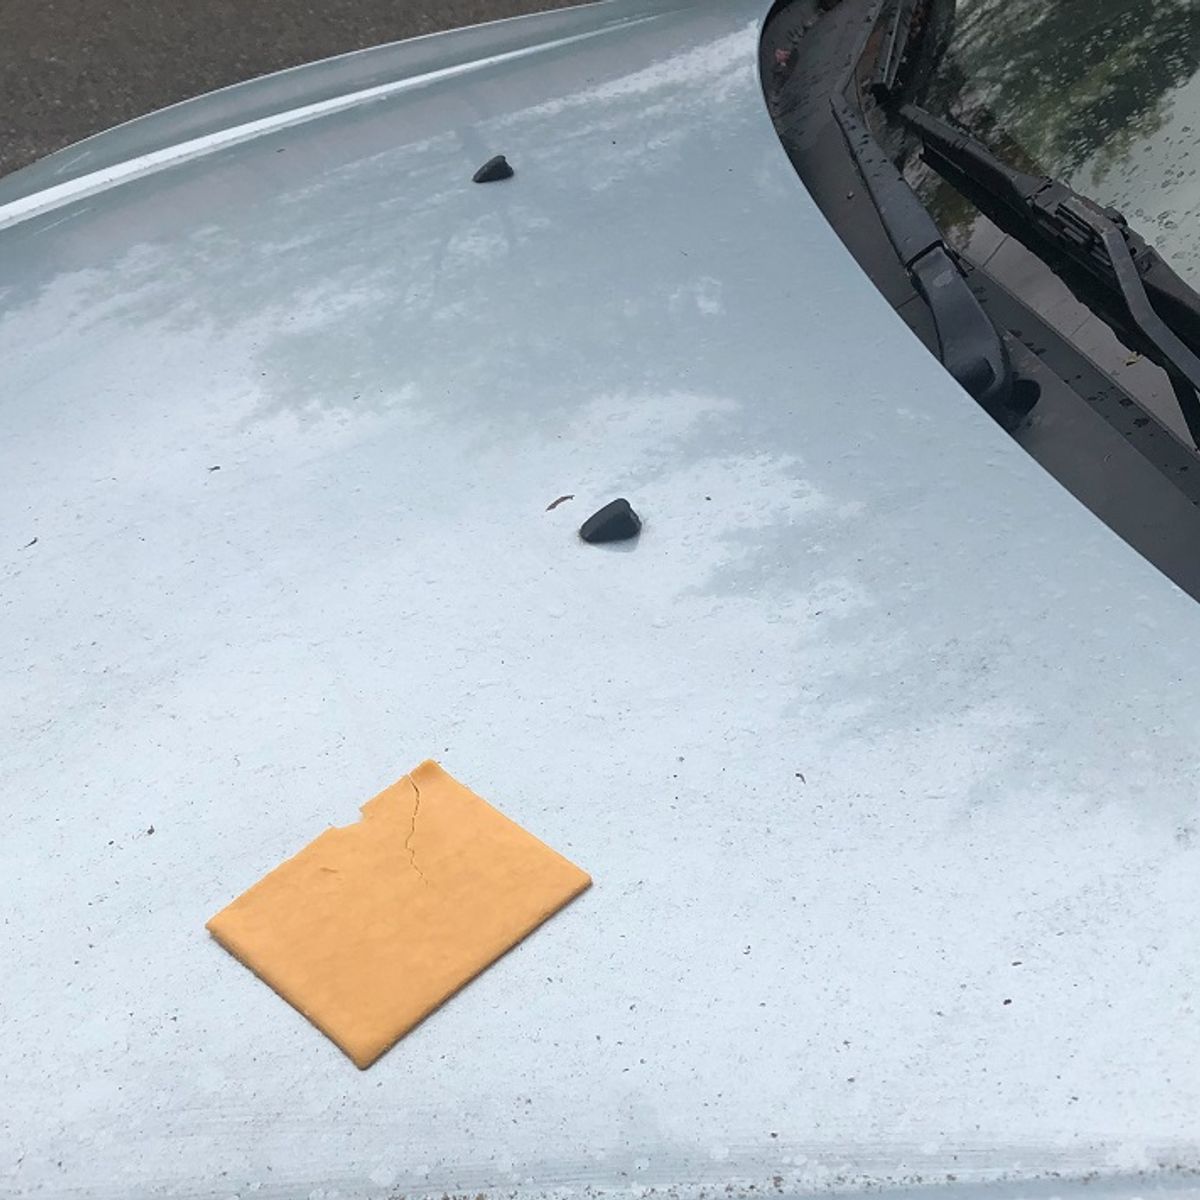 Does Finding Cheese on Your Car Hood Mean You Are in Danger?